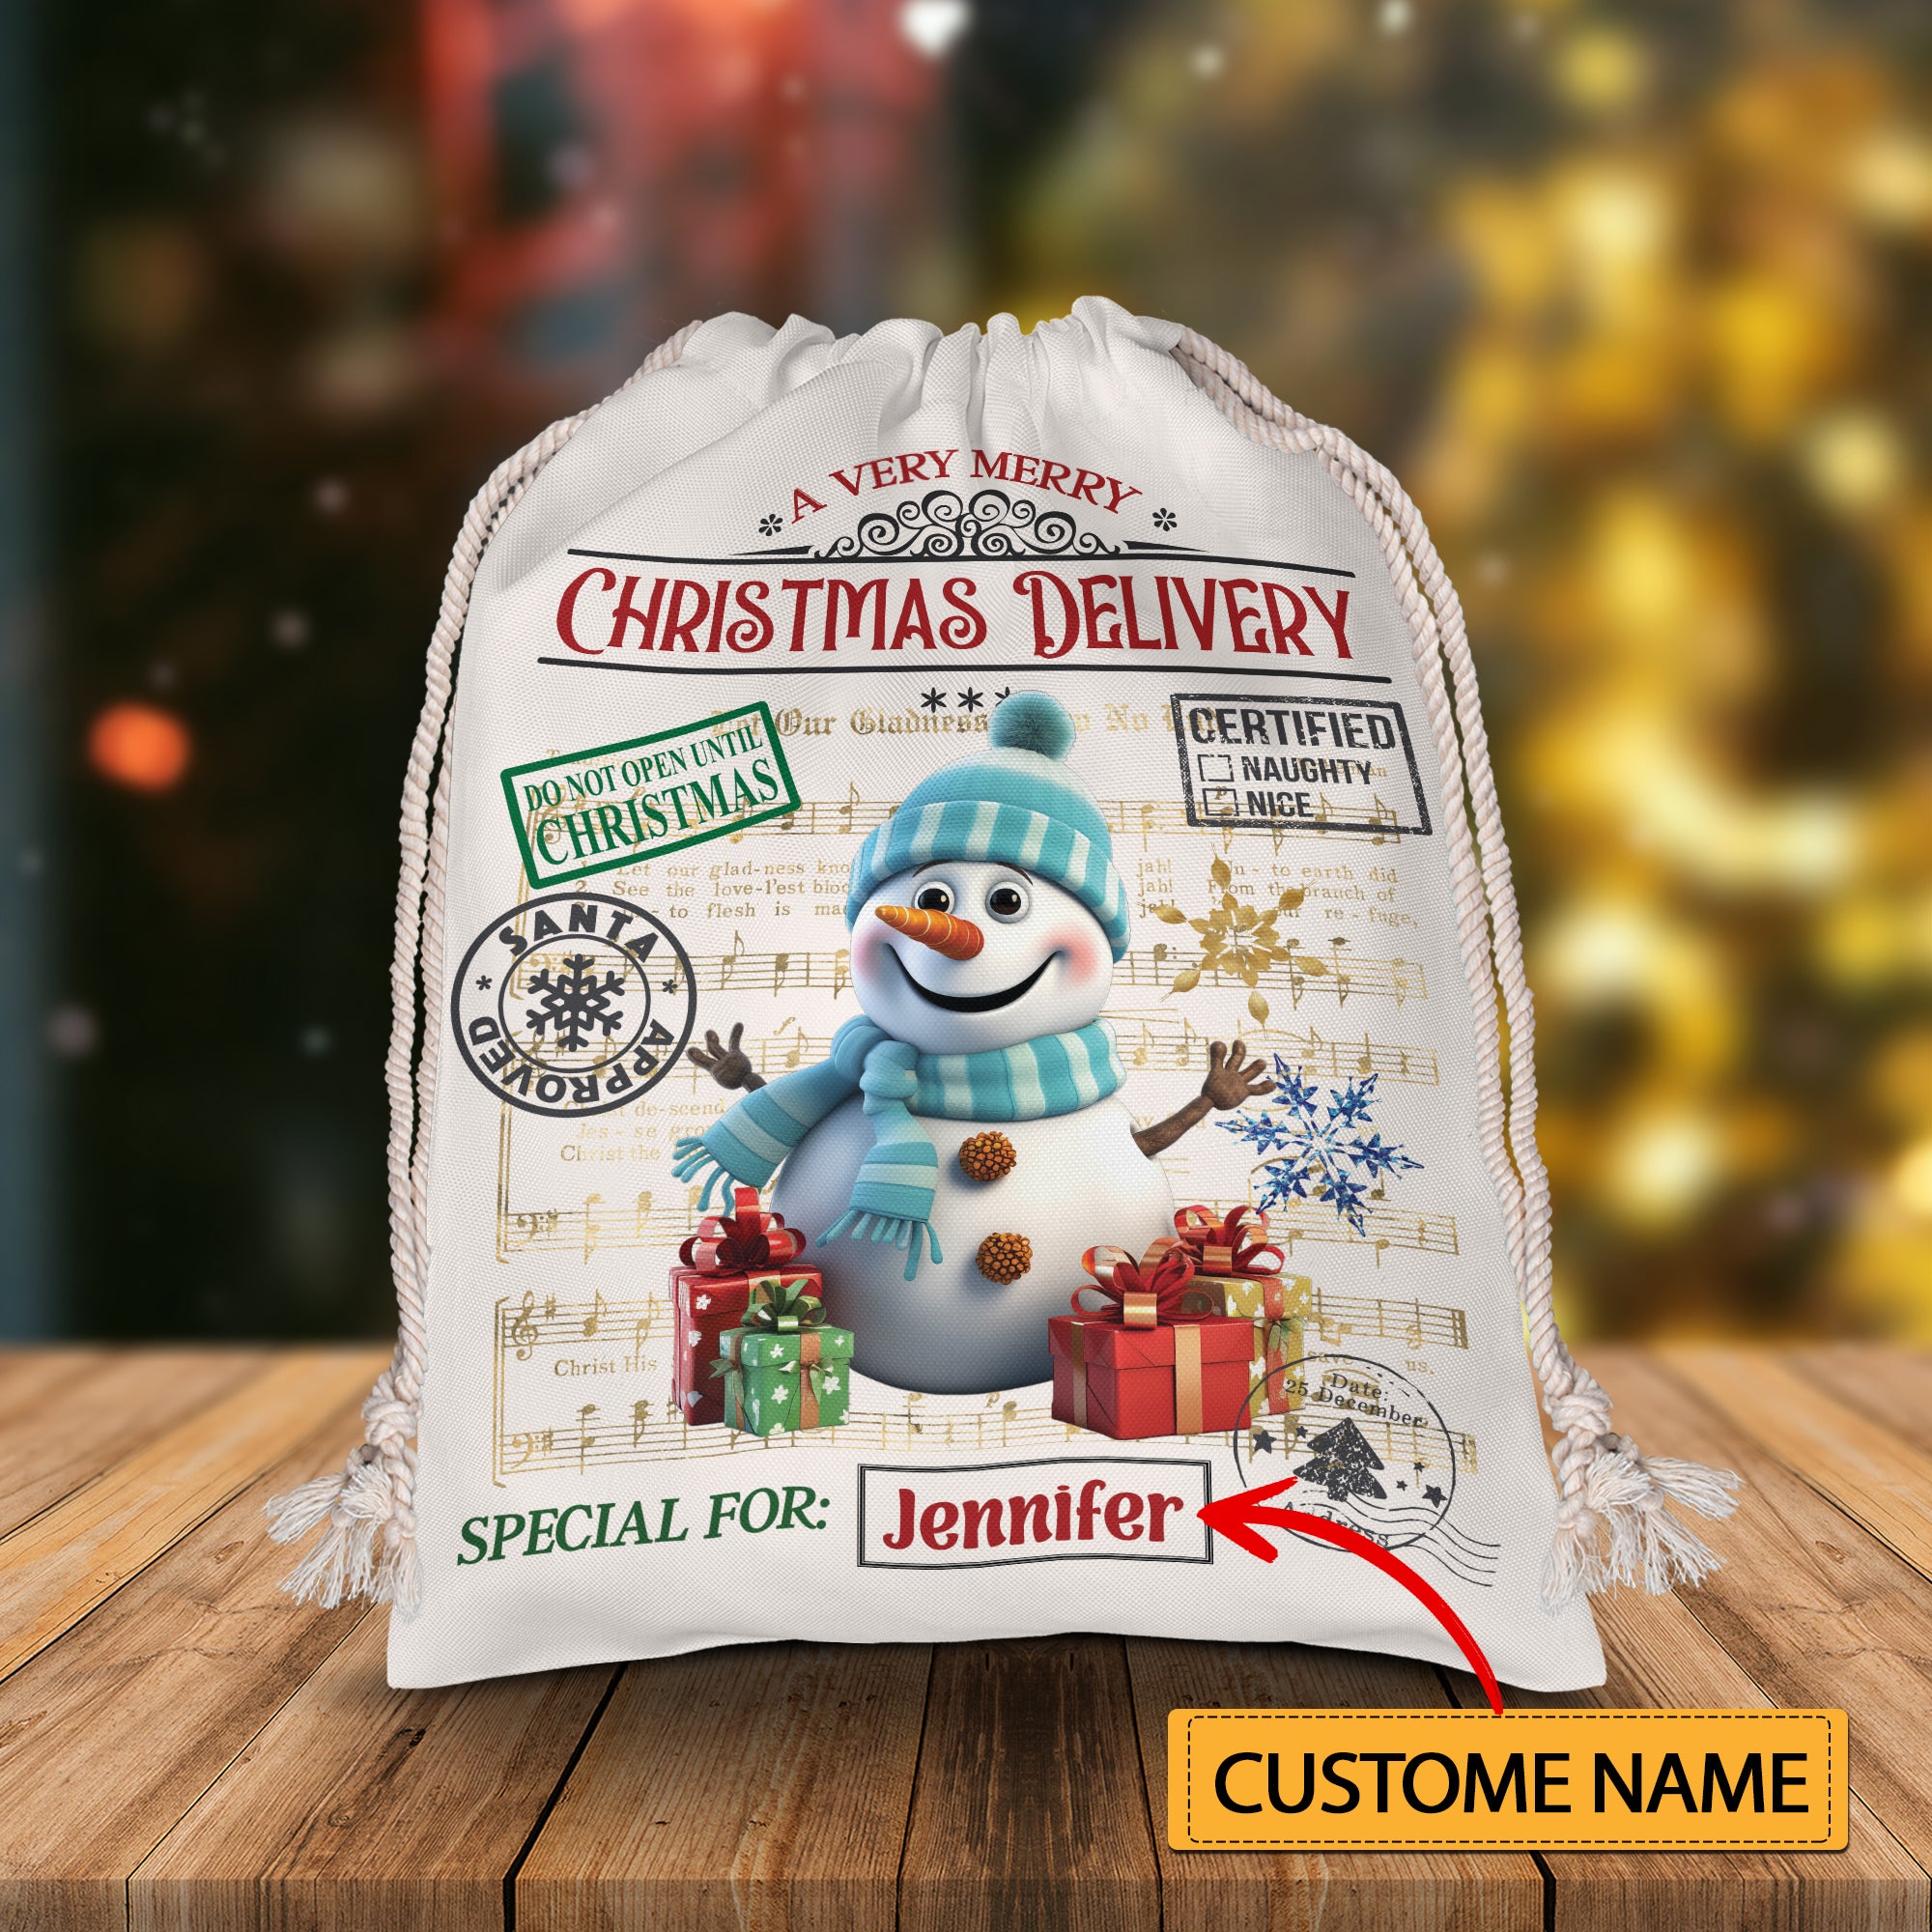 A Very Merry Christmas Delivery - Custom Name, Personalized String Bag, Christmas Gift